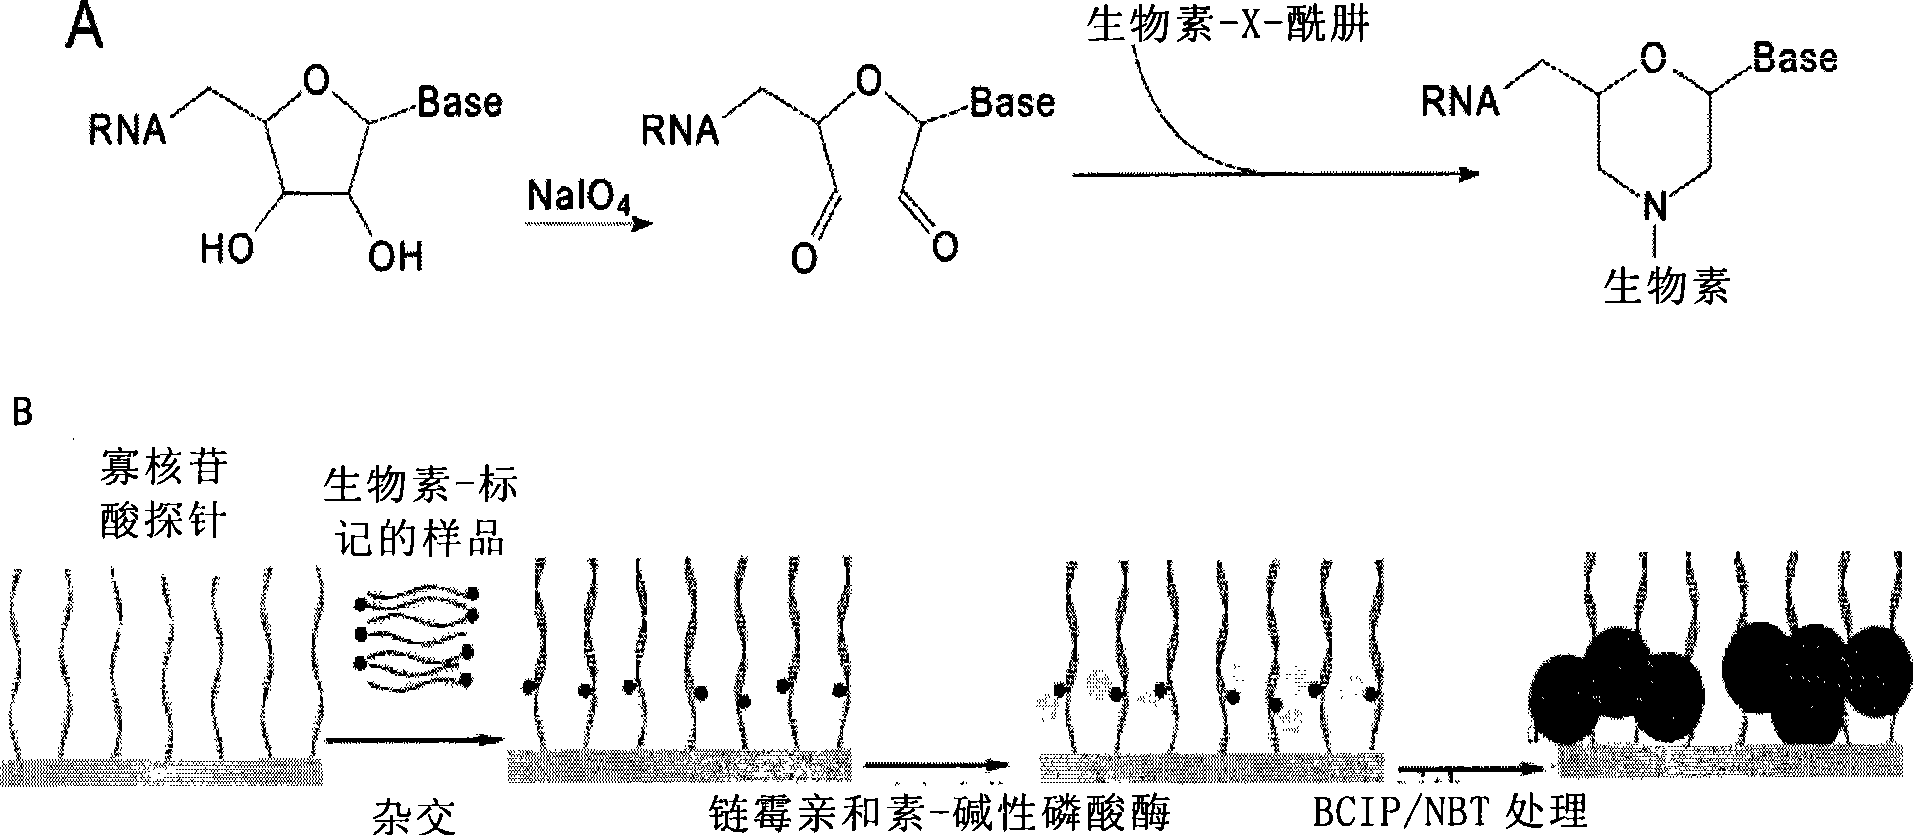 Method for detecting small molecule RNA chip by ELISA